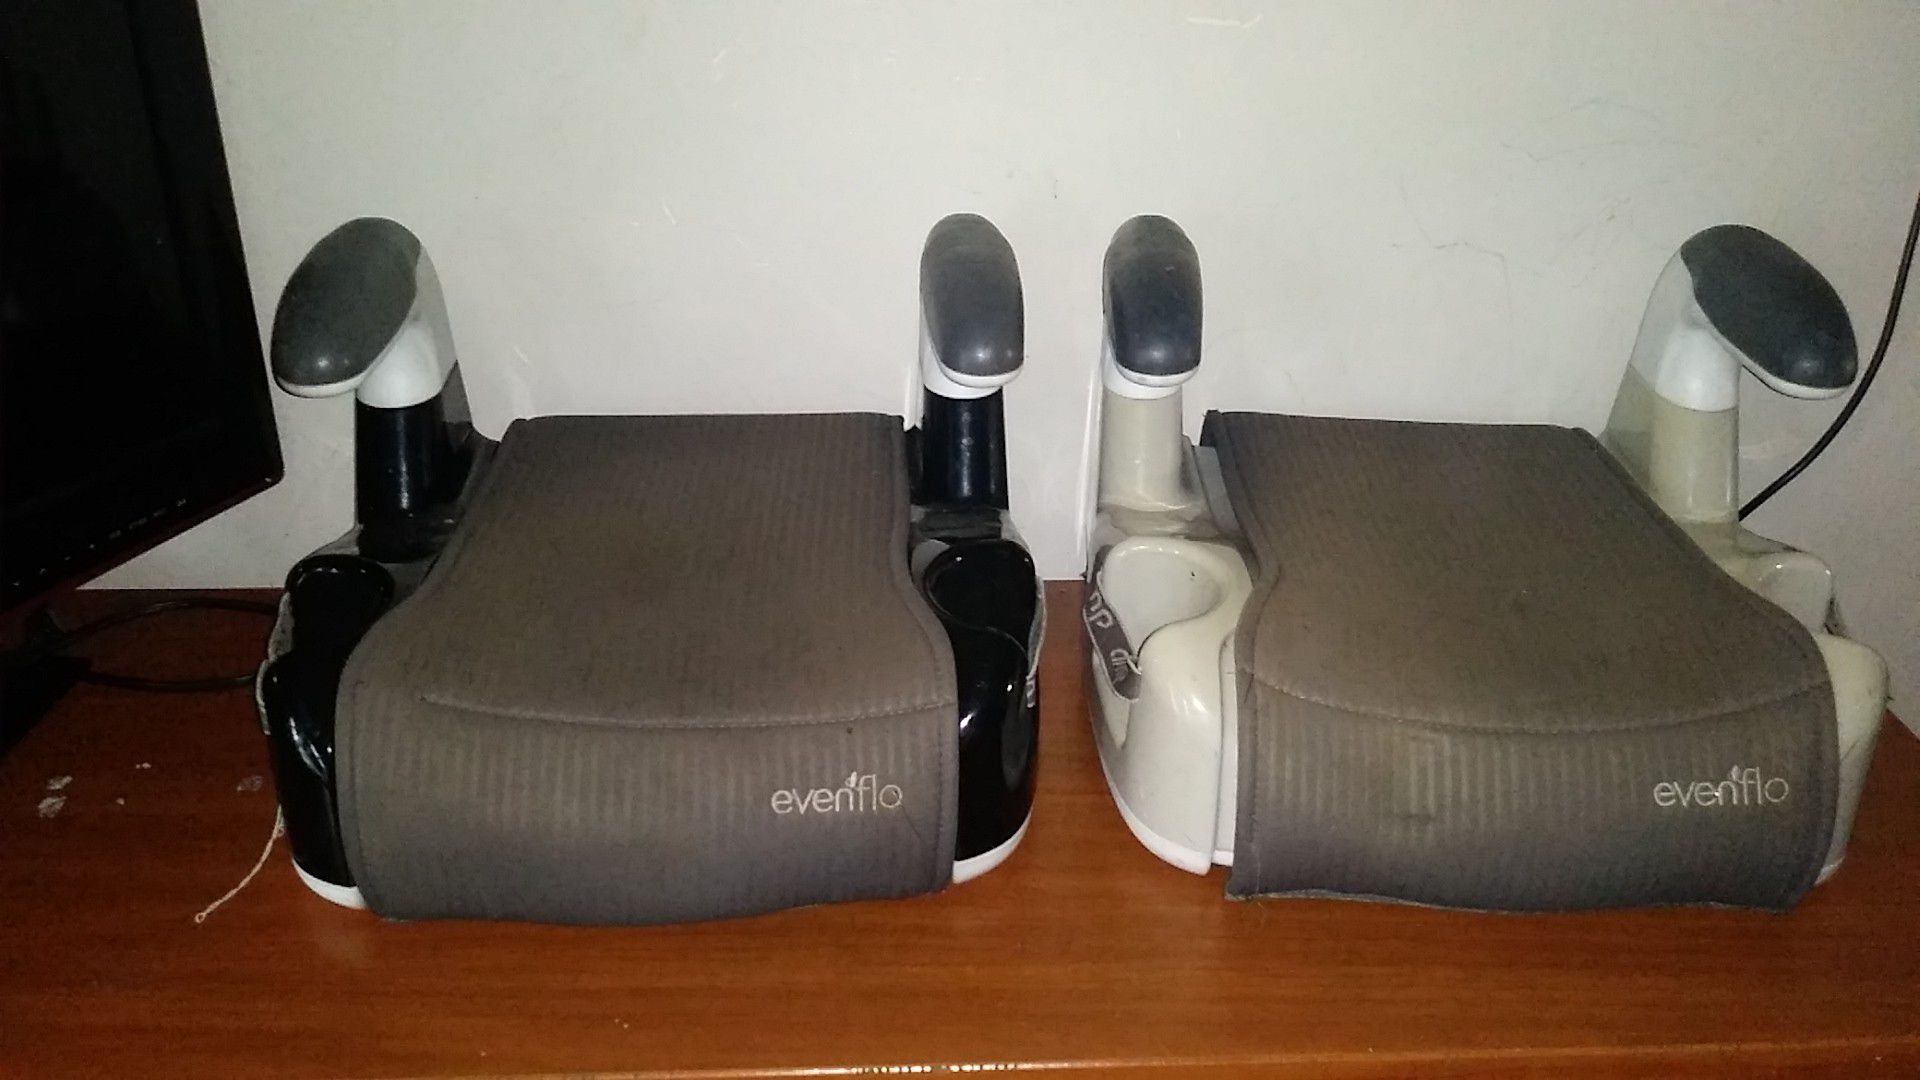 2 evenflo booster seats